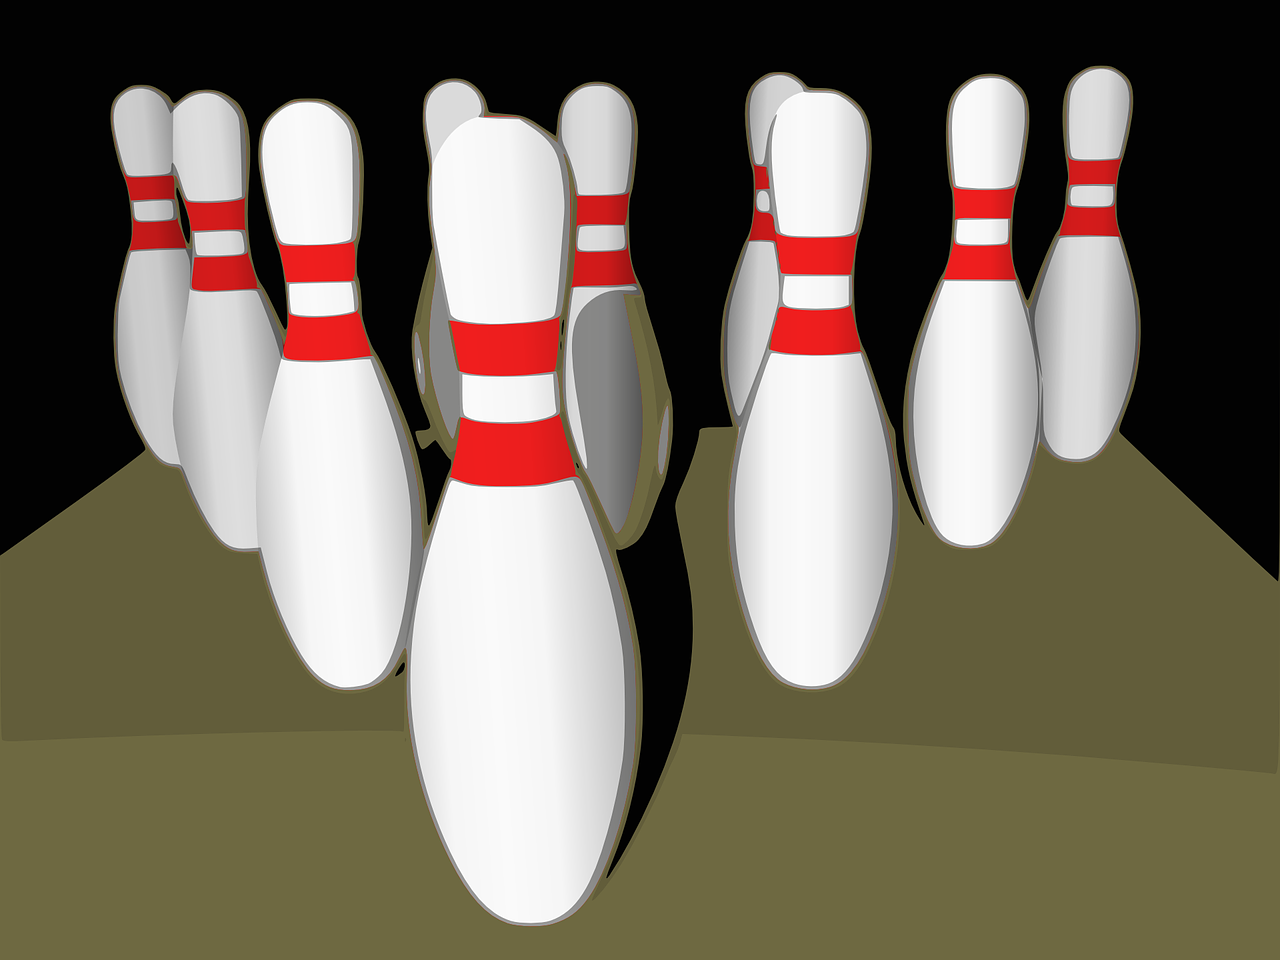 Chicagos Best 10 Pin Bowling Lanes Fireside Bowl To Lucky Strike.